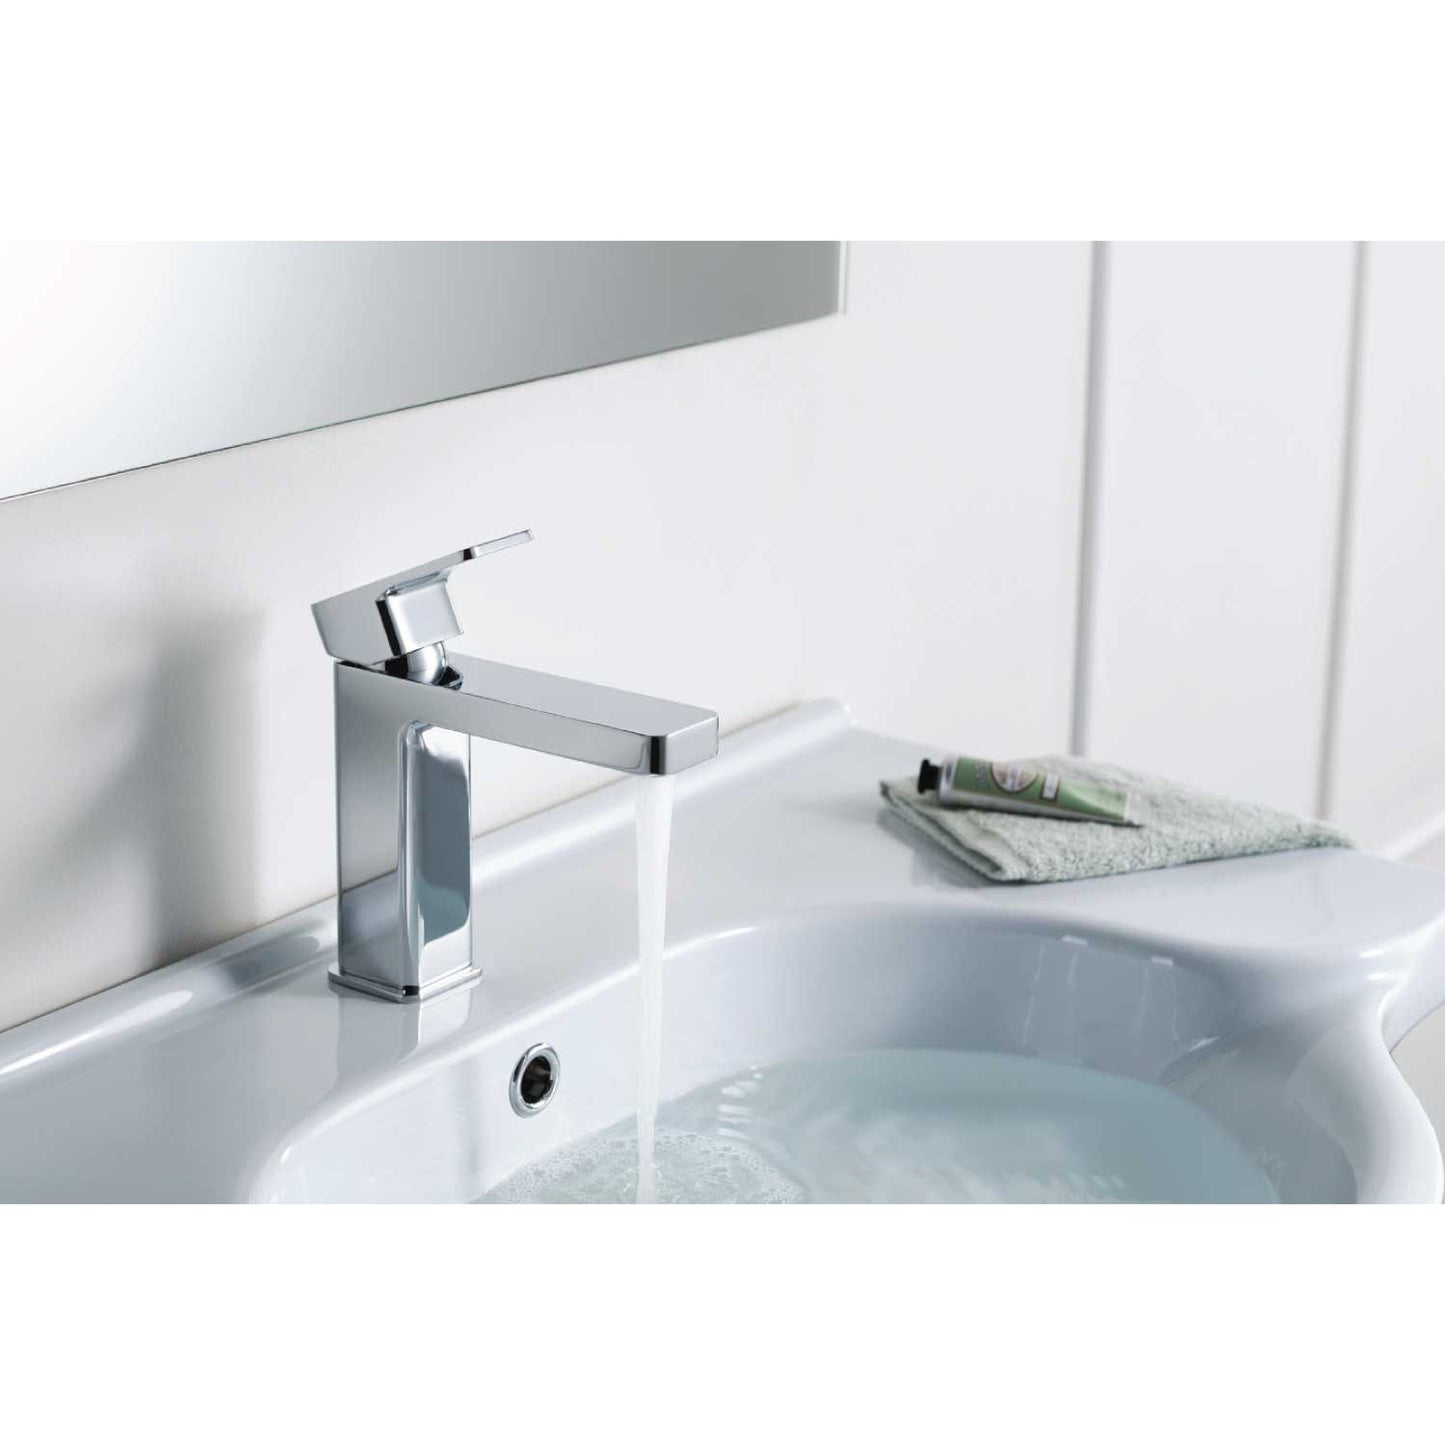 Isenberg Serie 196 7" Single-Hole Chrome Deck-Mounted Bathroom Sink Faucet With Pop-Up Drain and Adjustable Hot Limit Safety Stop